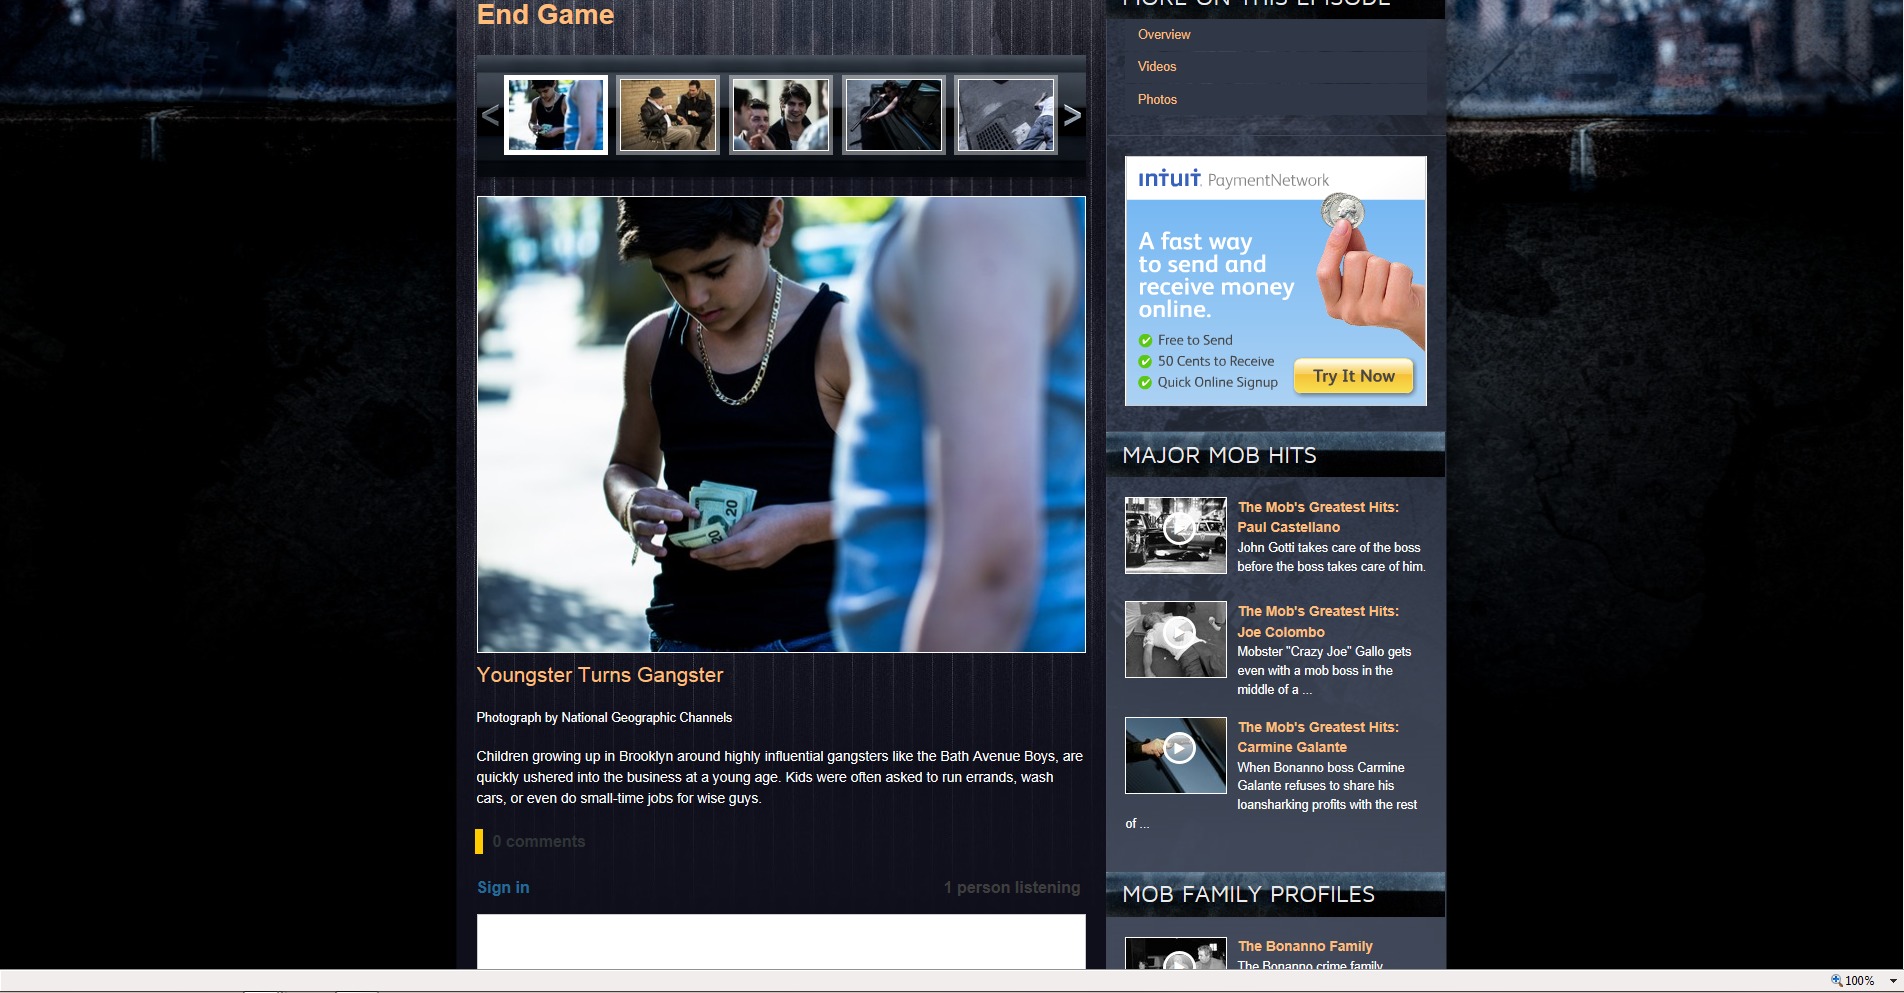 Evan Fenster on National Geographic Channel Website portraying Young Jimmy Calandra for TV show 